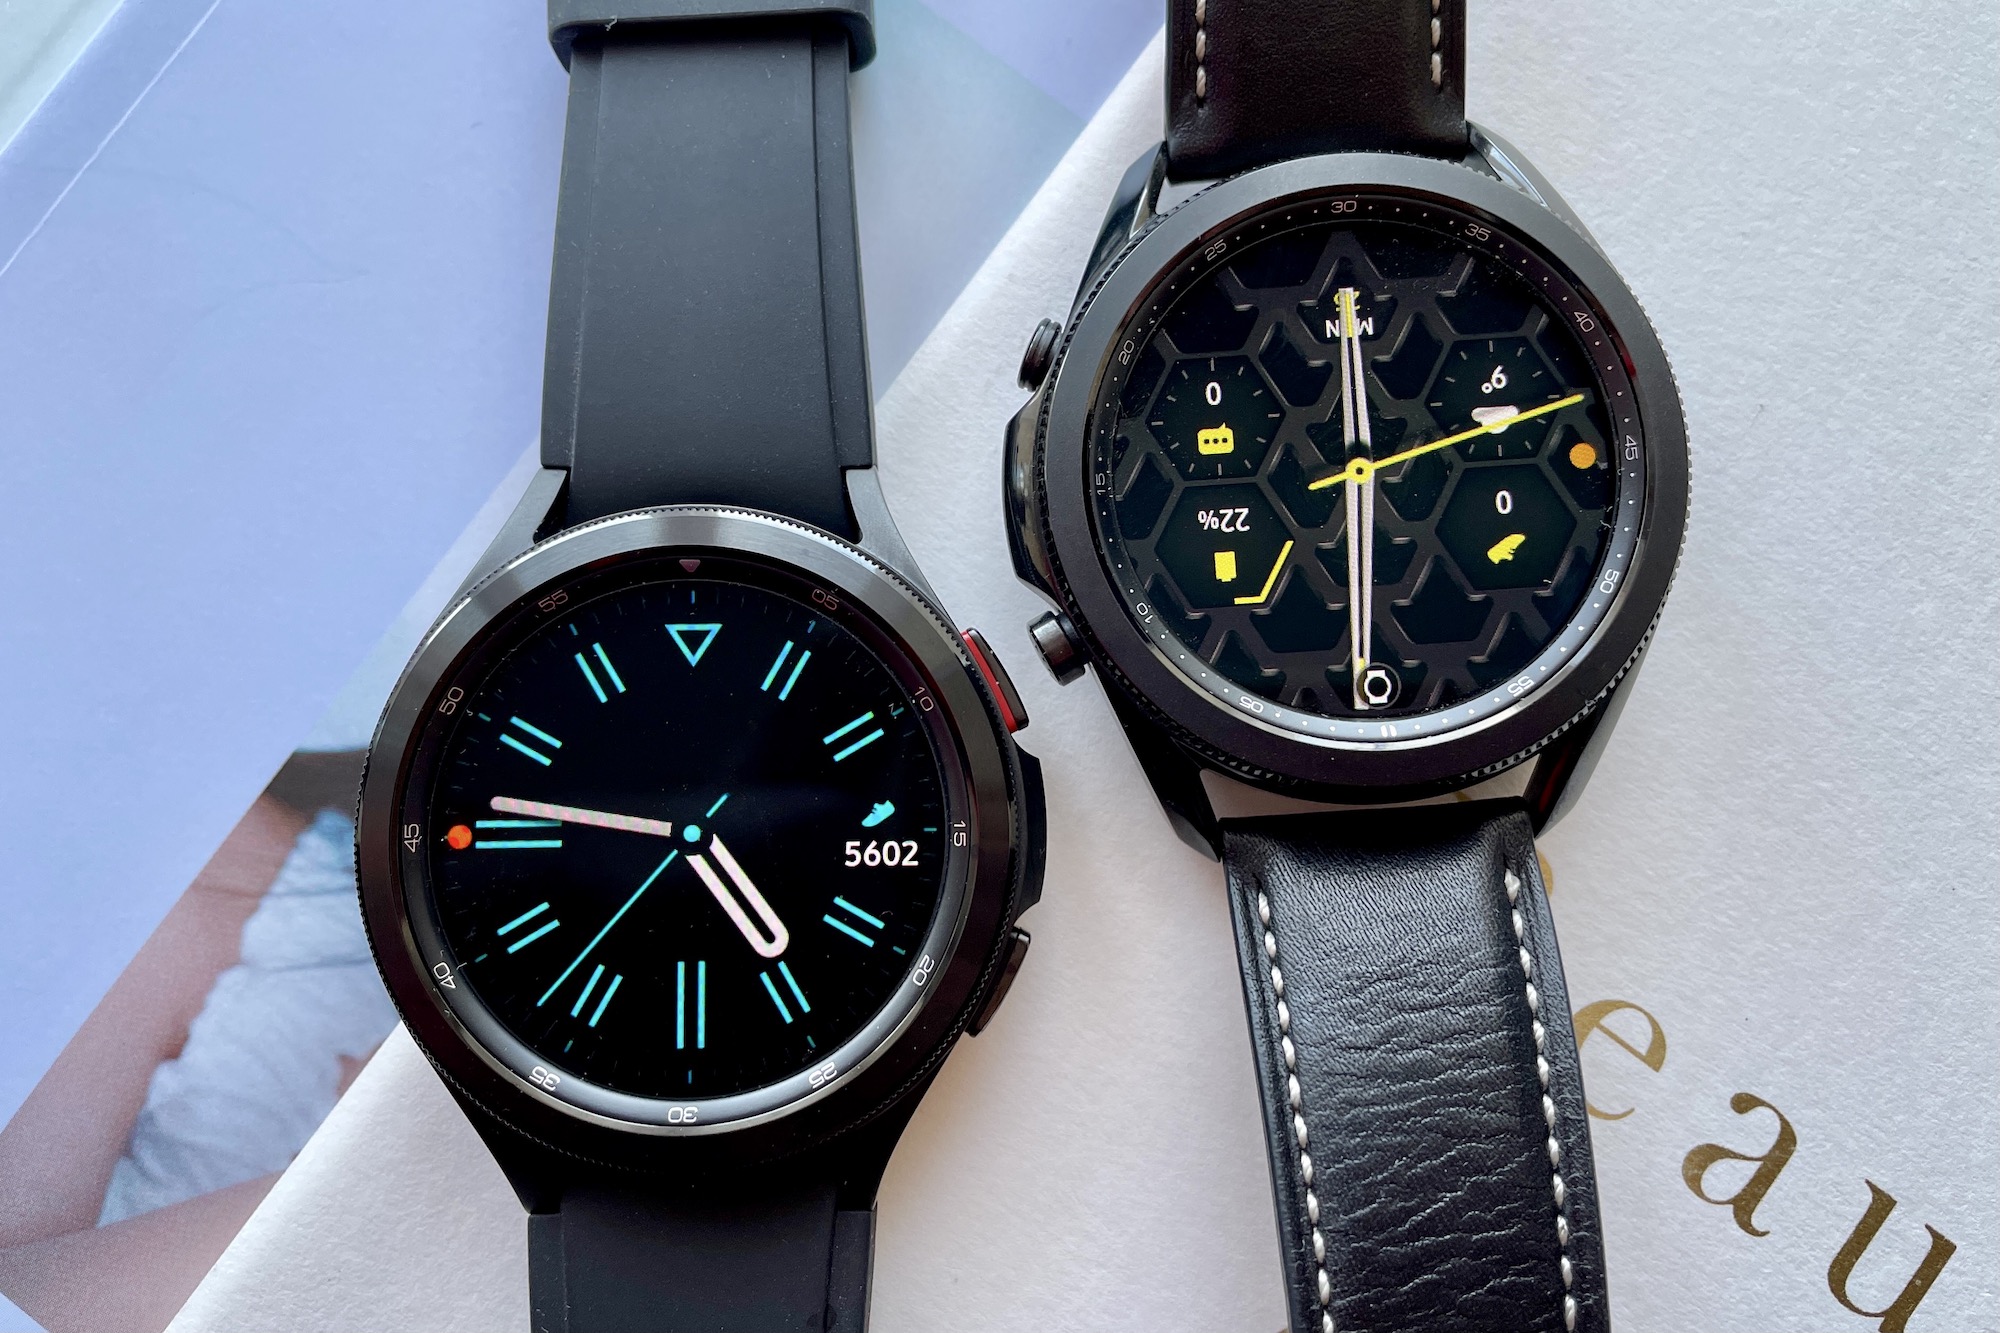 Galaxy Watch 4 Classic (left) and Galaxy Watch 3 (right).